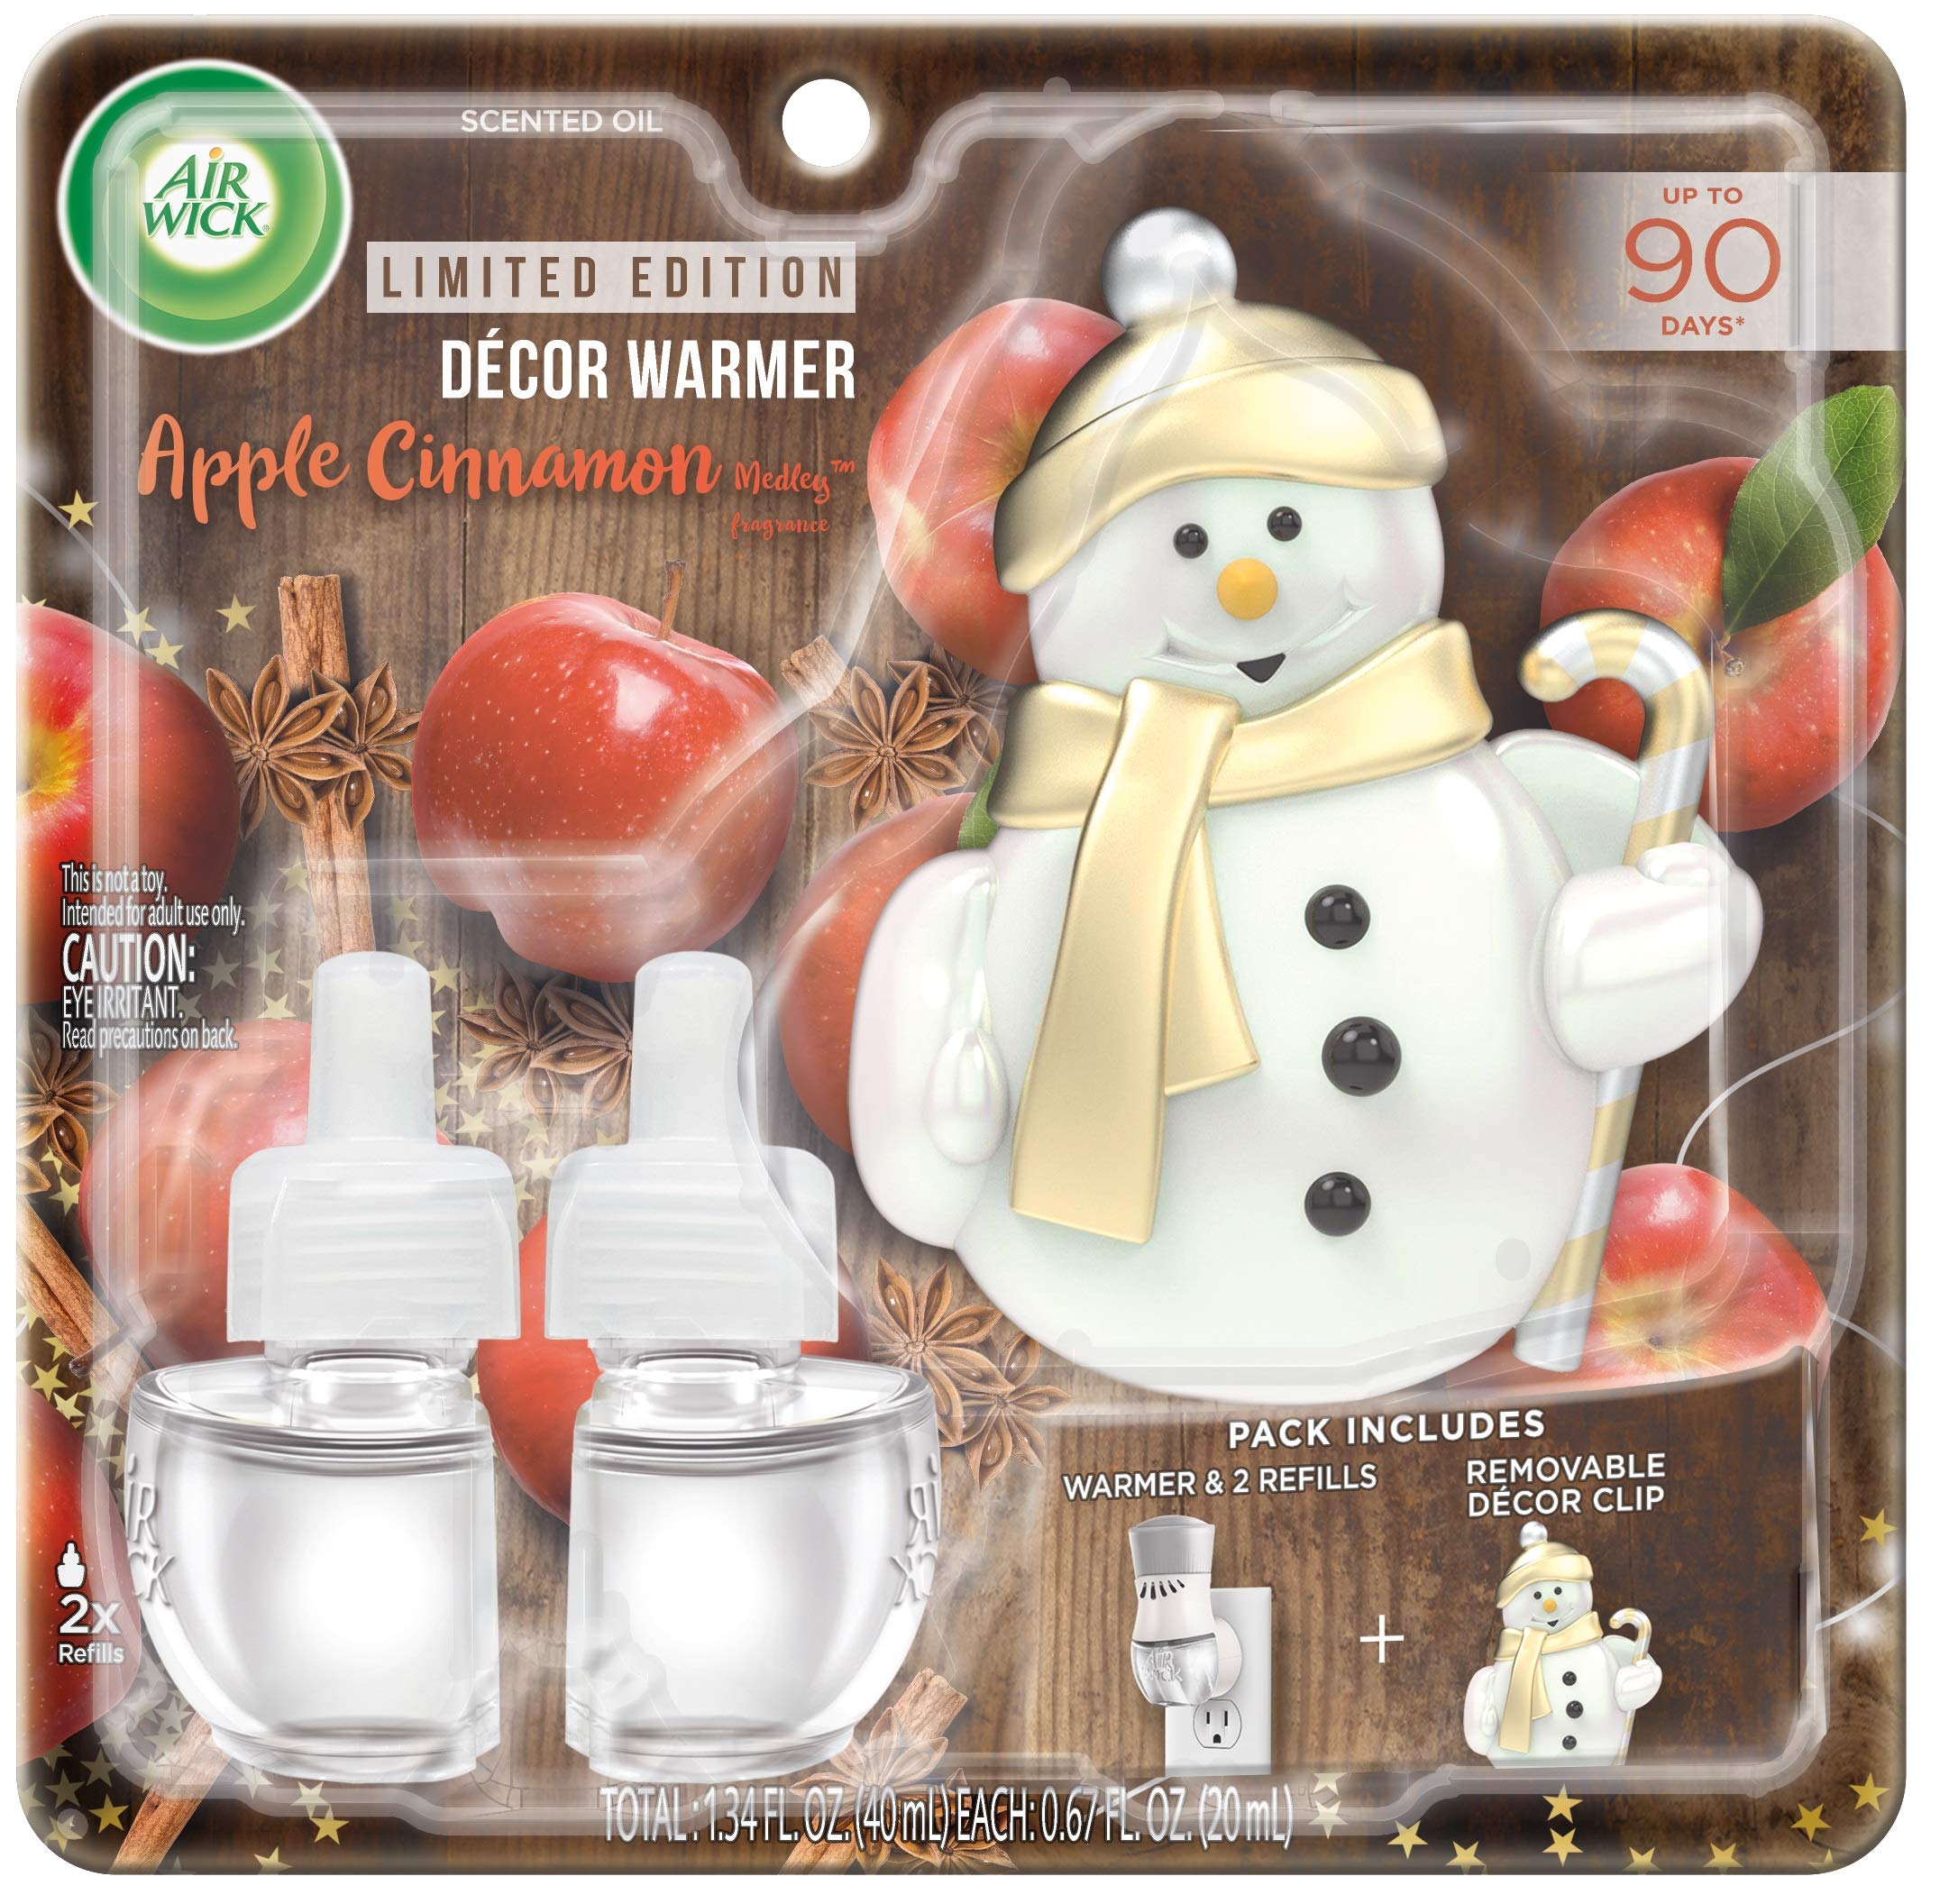 Book Cover Air Wick Plug in Scented Oil Starter Kit with Snowman Free Decorative Warmer + 2 Refills, Apple Cinnamon, Fall Scent, Fall Spray, (2x0.67oz), Essential Oils, Air Freshener 4 Piece Set Decorative Leaf Warmer